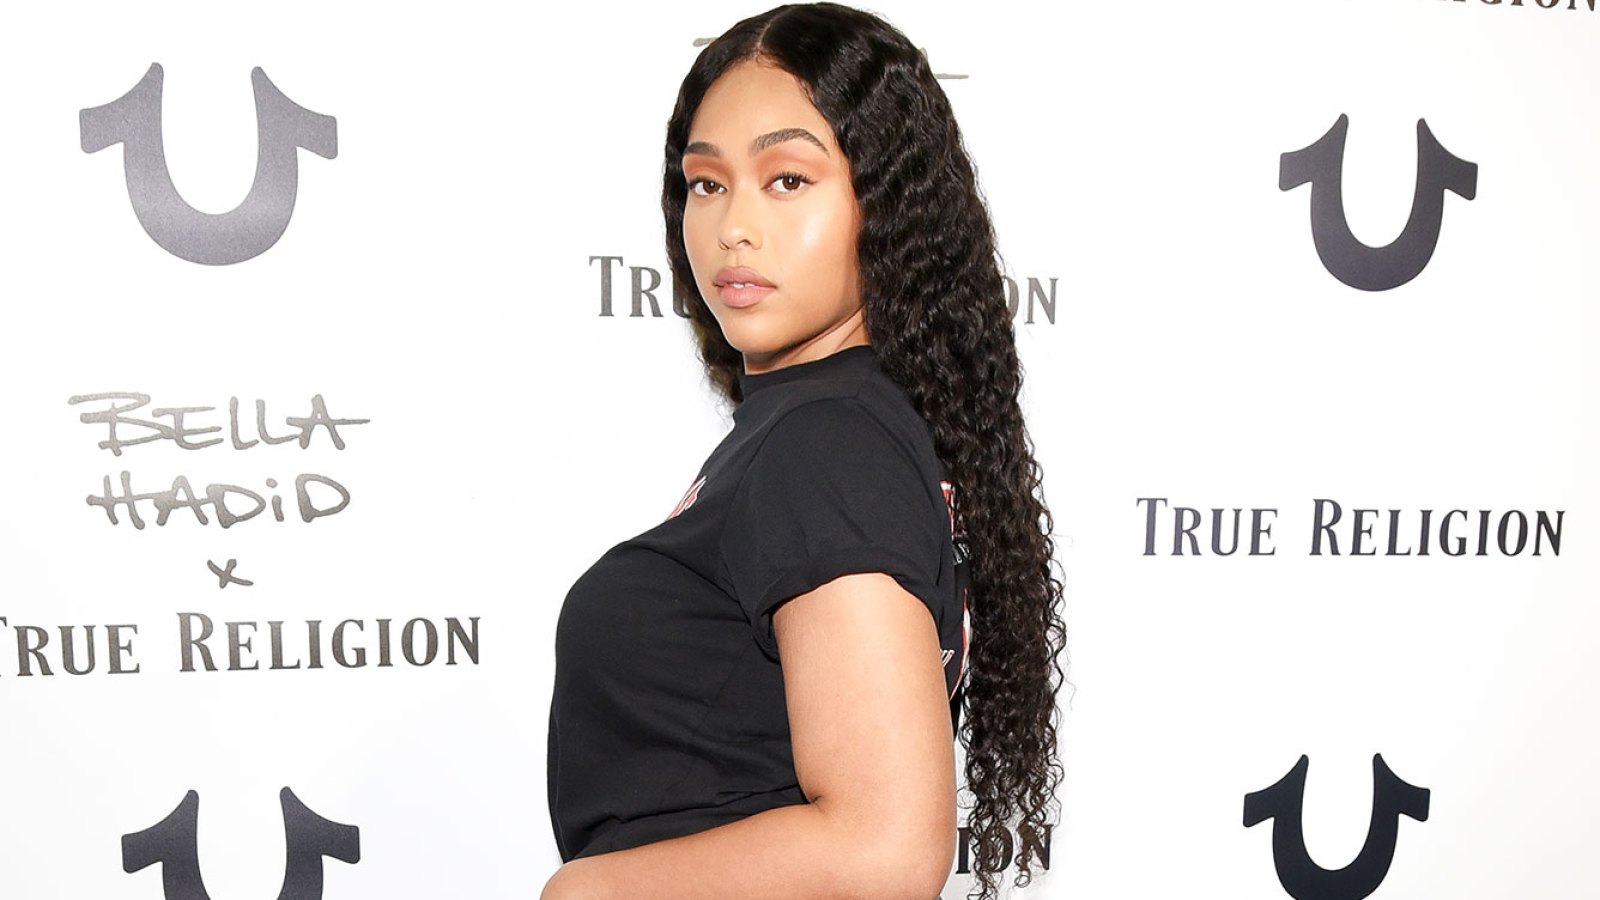 Jordyn Woods Returns to Work a Month After Tristan Thompson Cheating Scandal